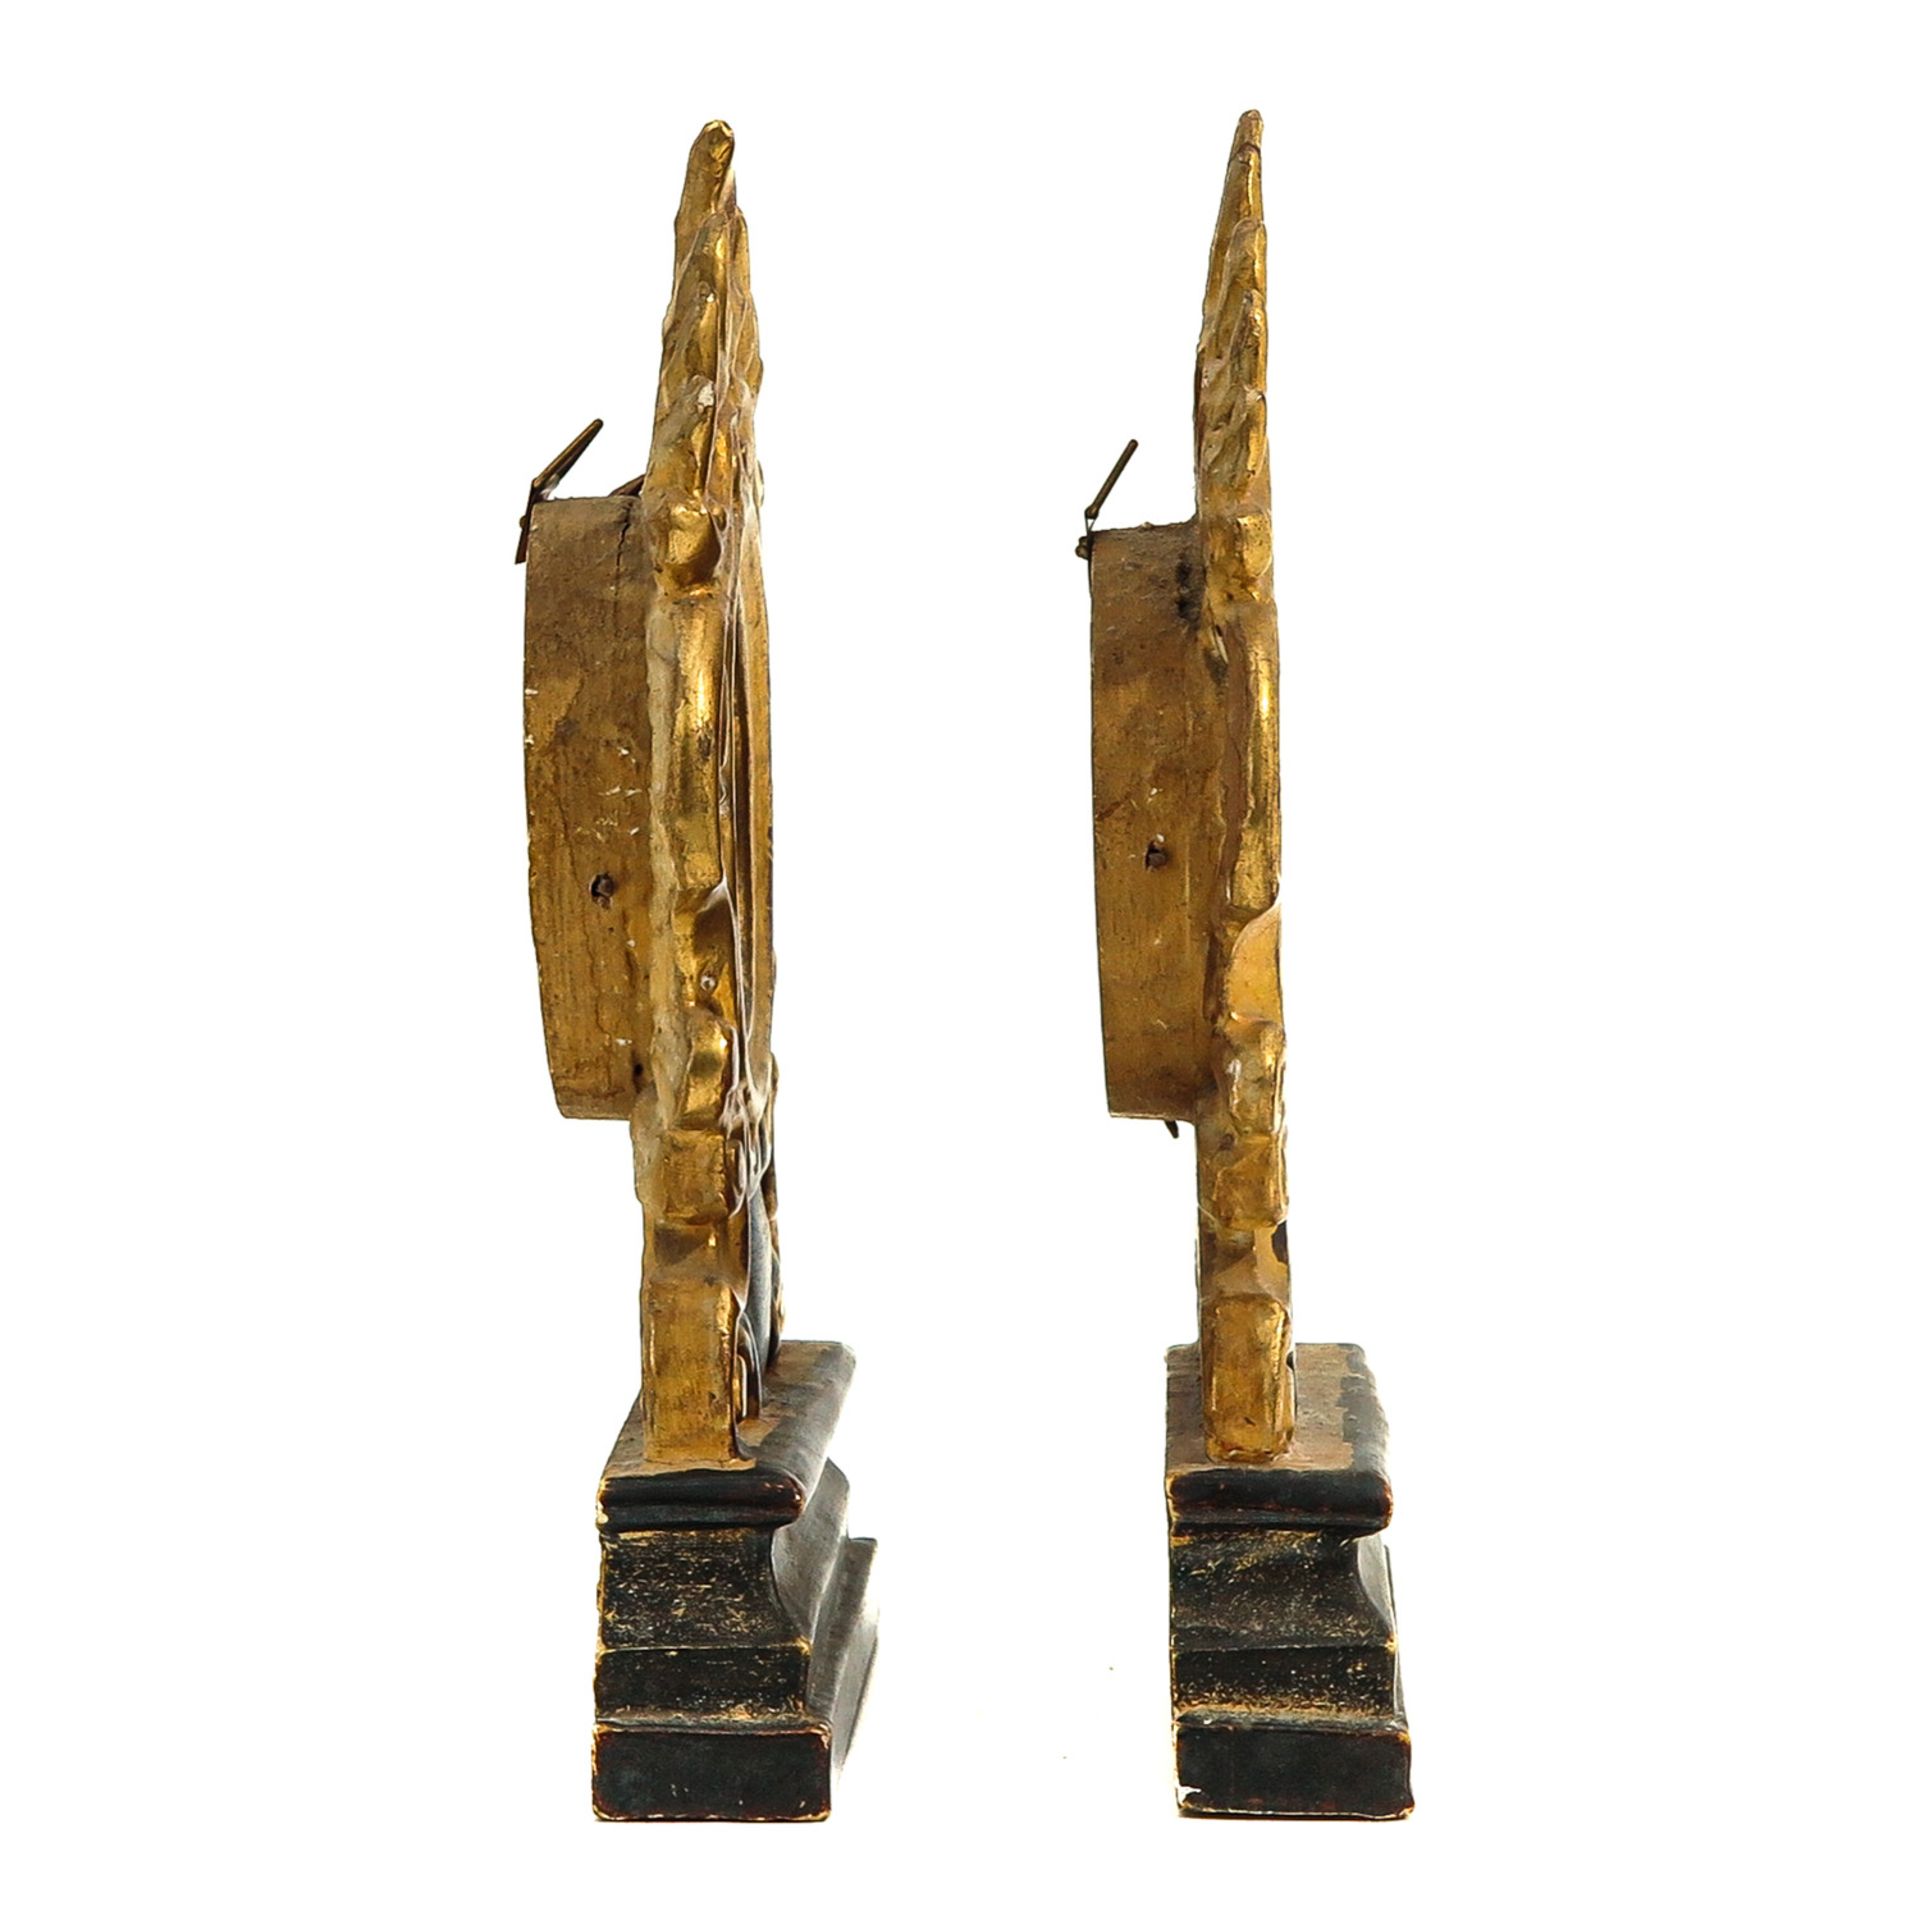 A Pair of Relic Holders Each Holding 5 Relics - Image 4 of 7